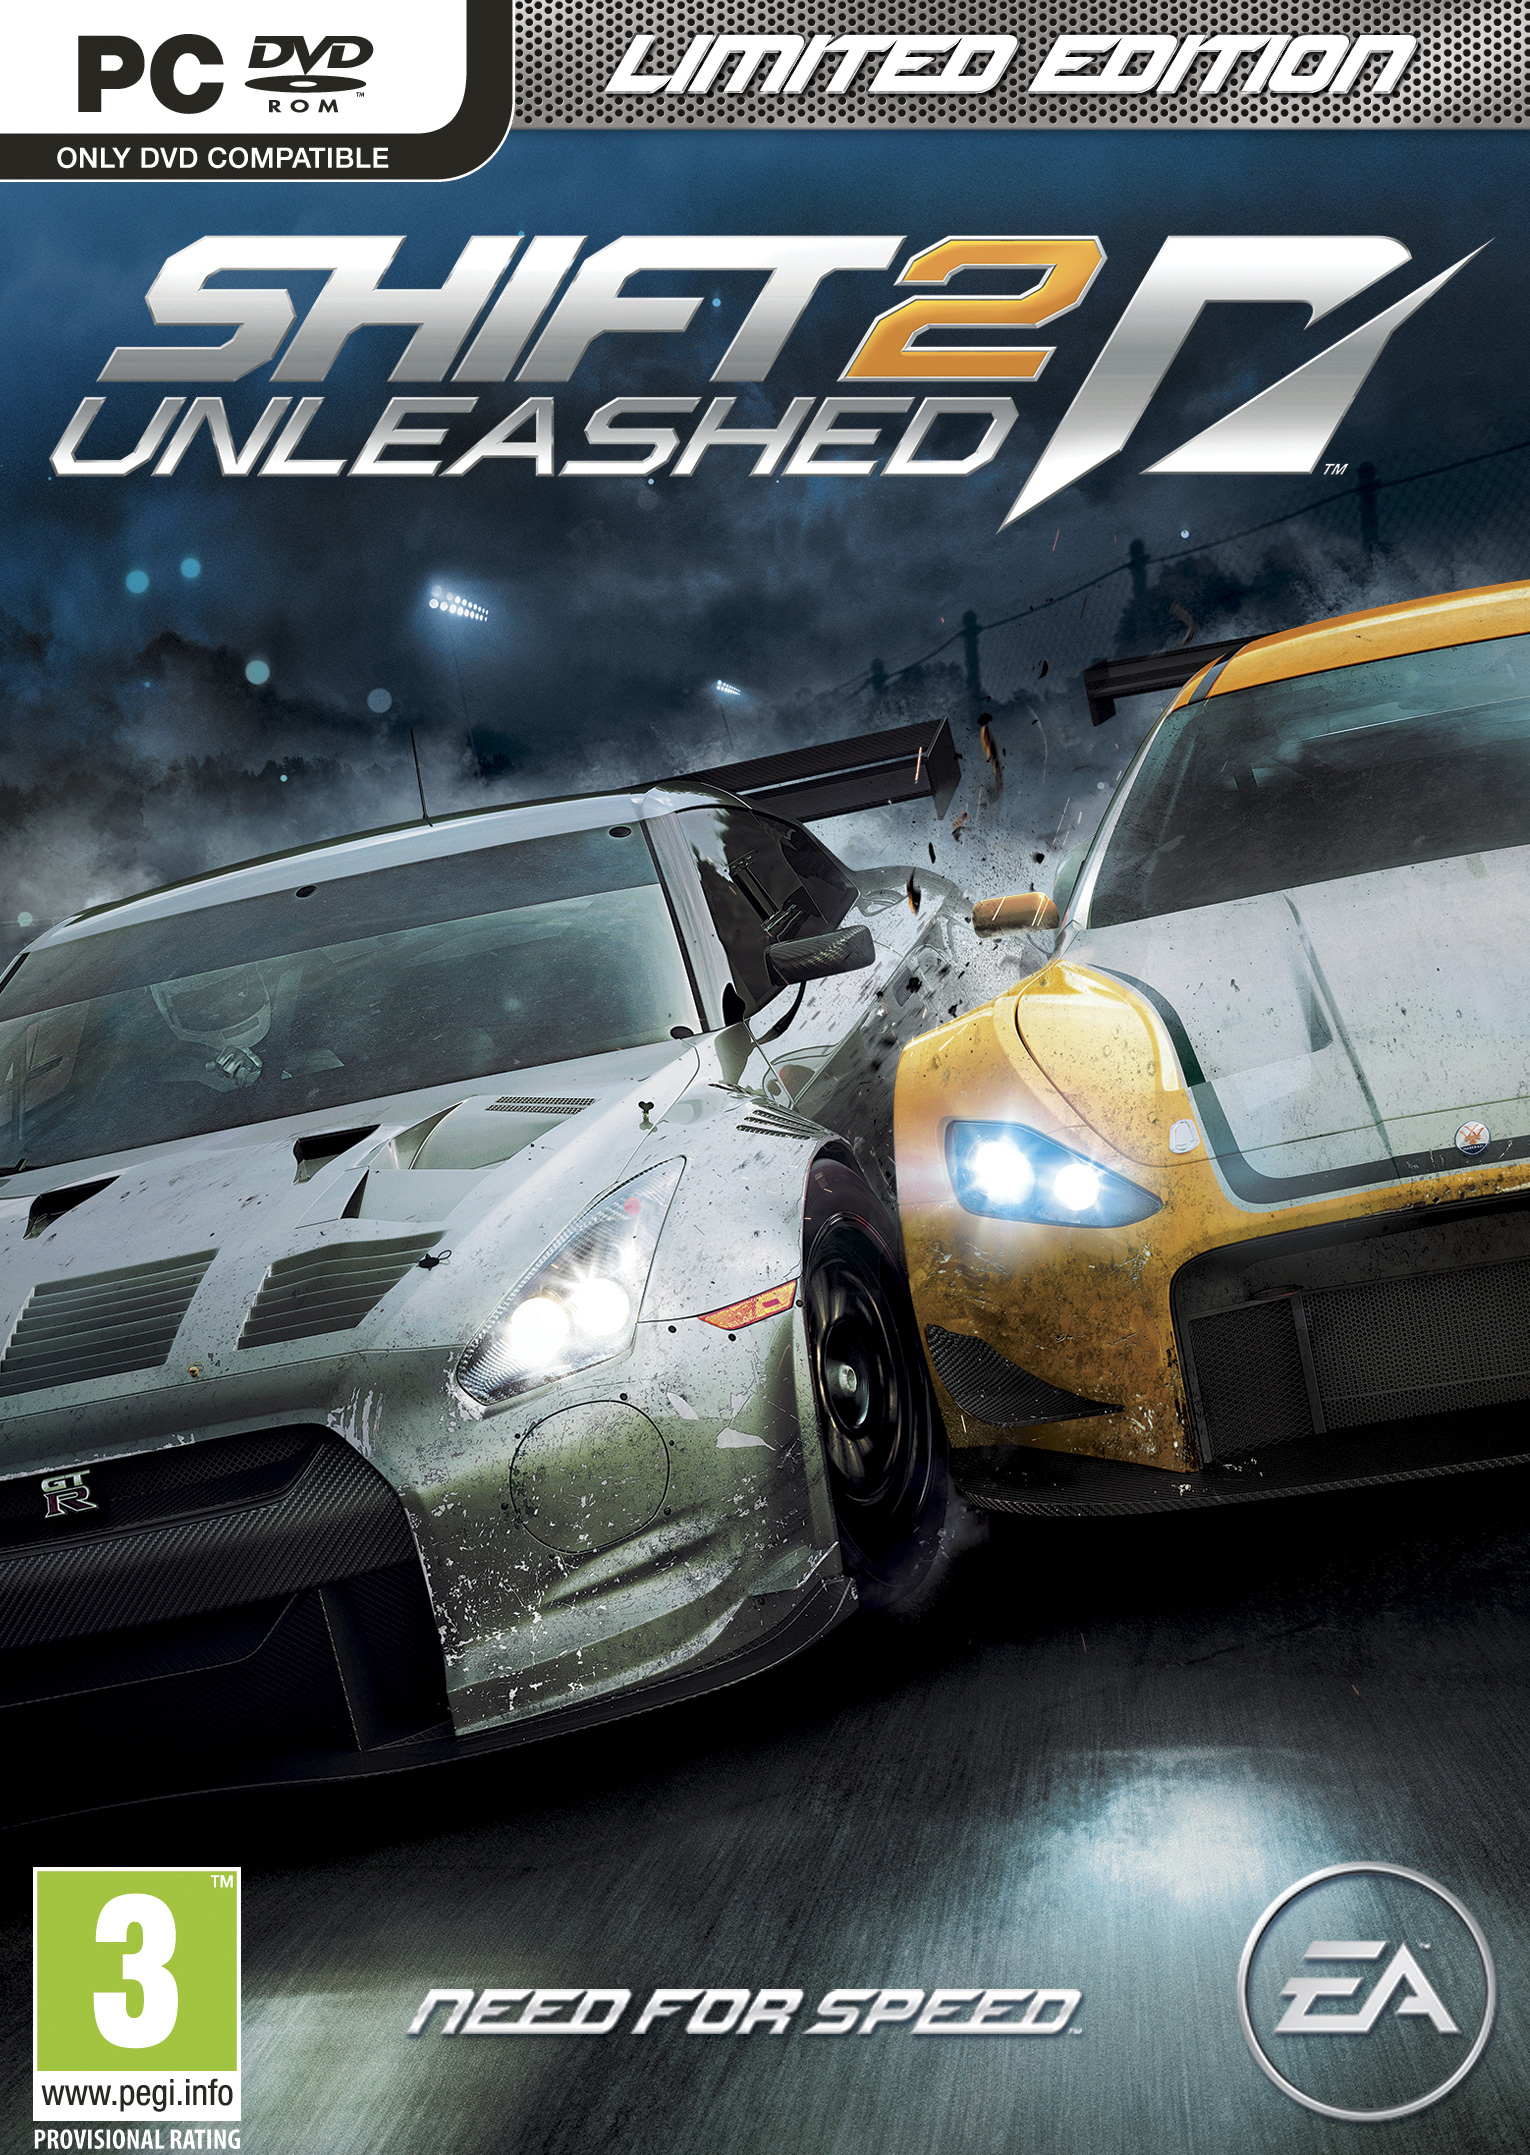 Need for Speed Shift 2: Unleashed - pedn DVD obal 2